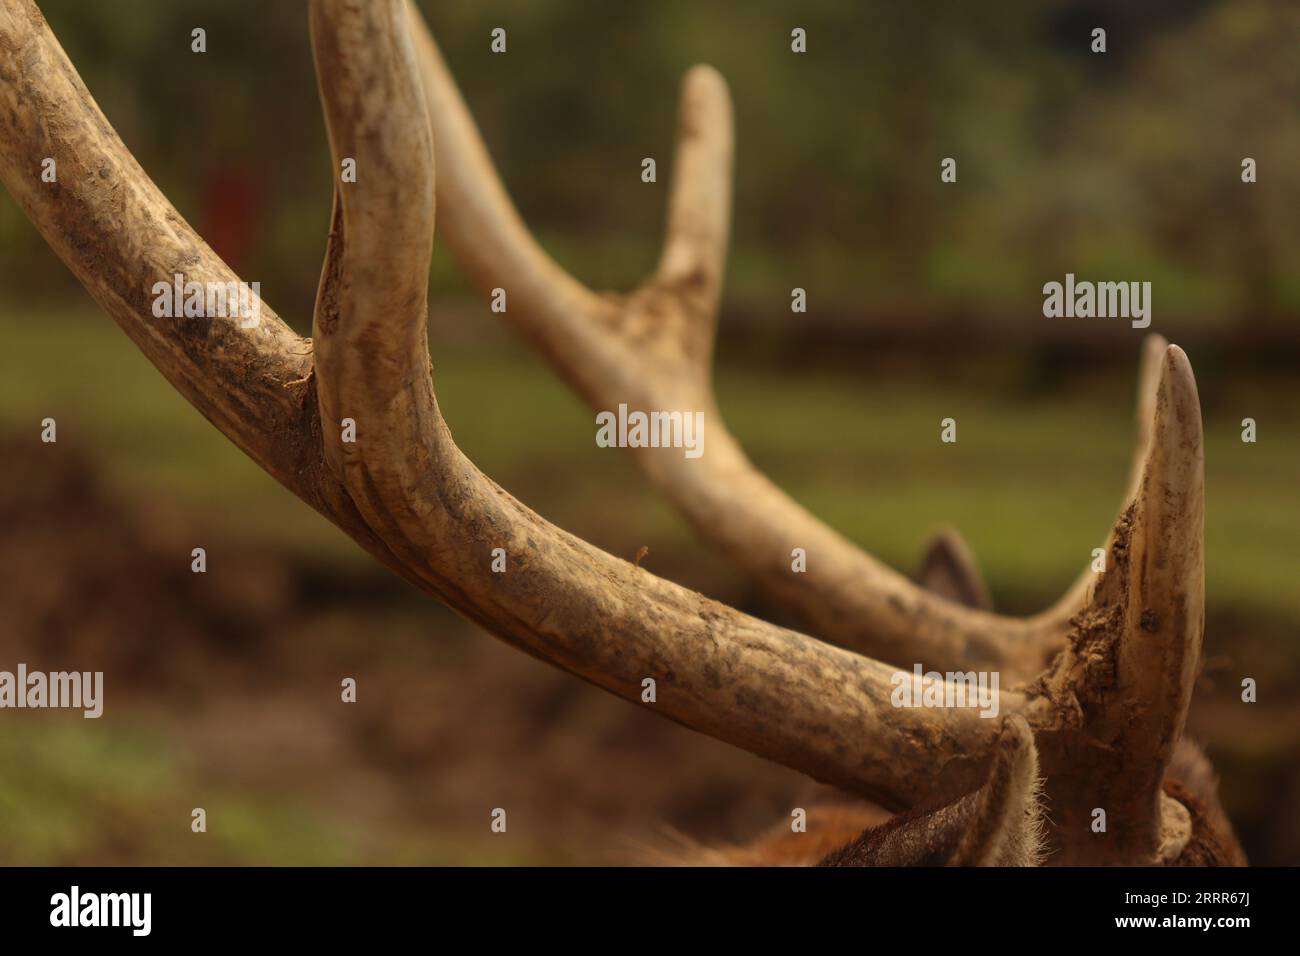 A Deer Antlers Closed Up Stock Photo